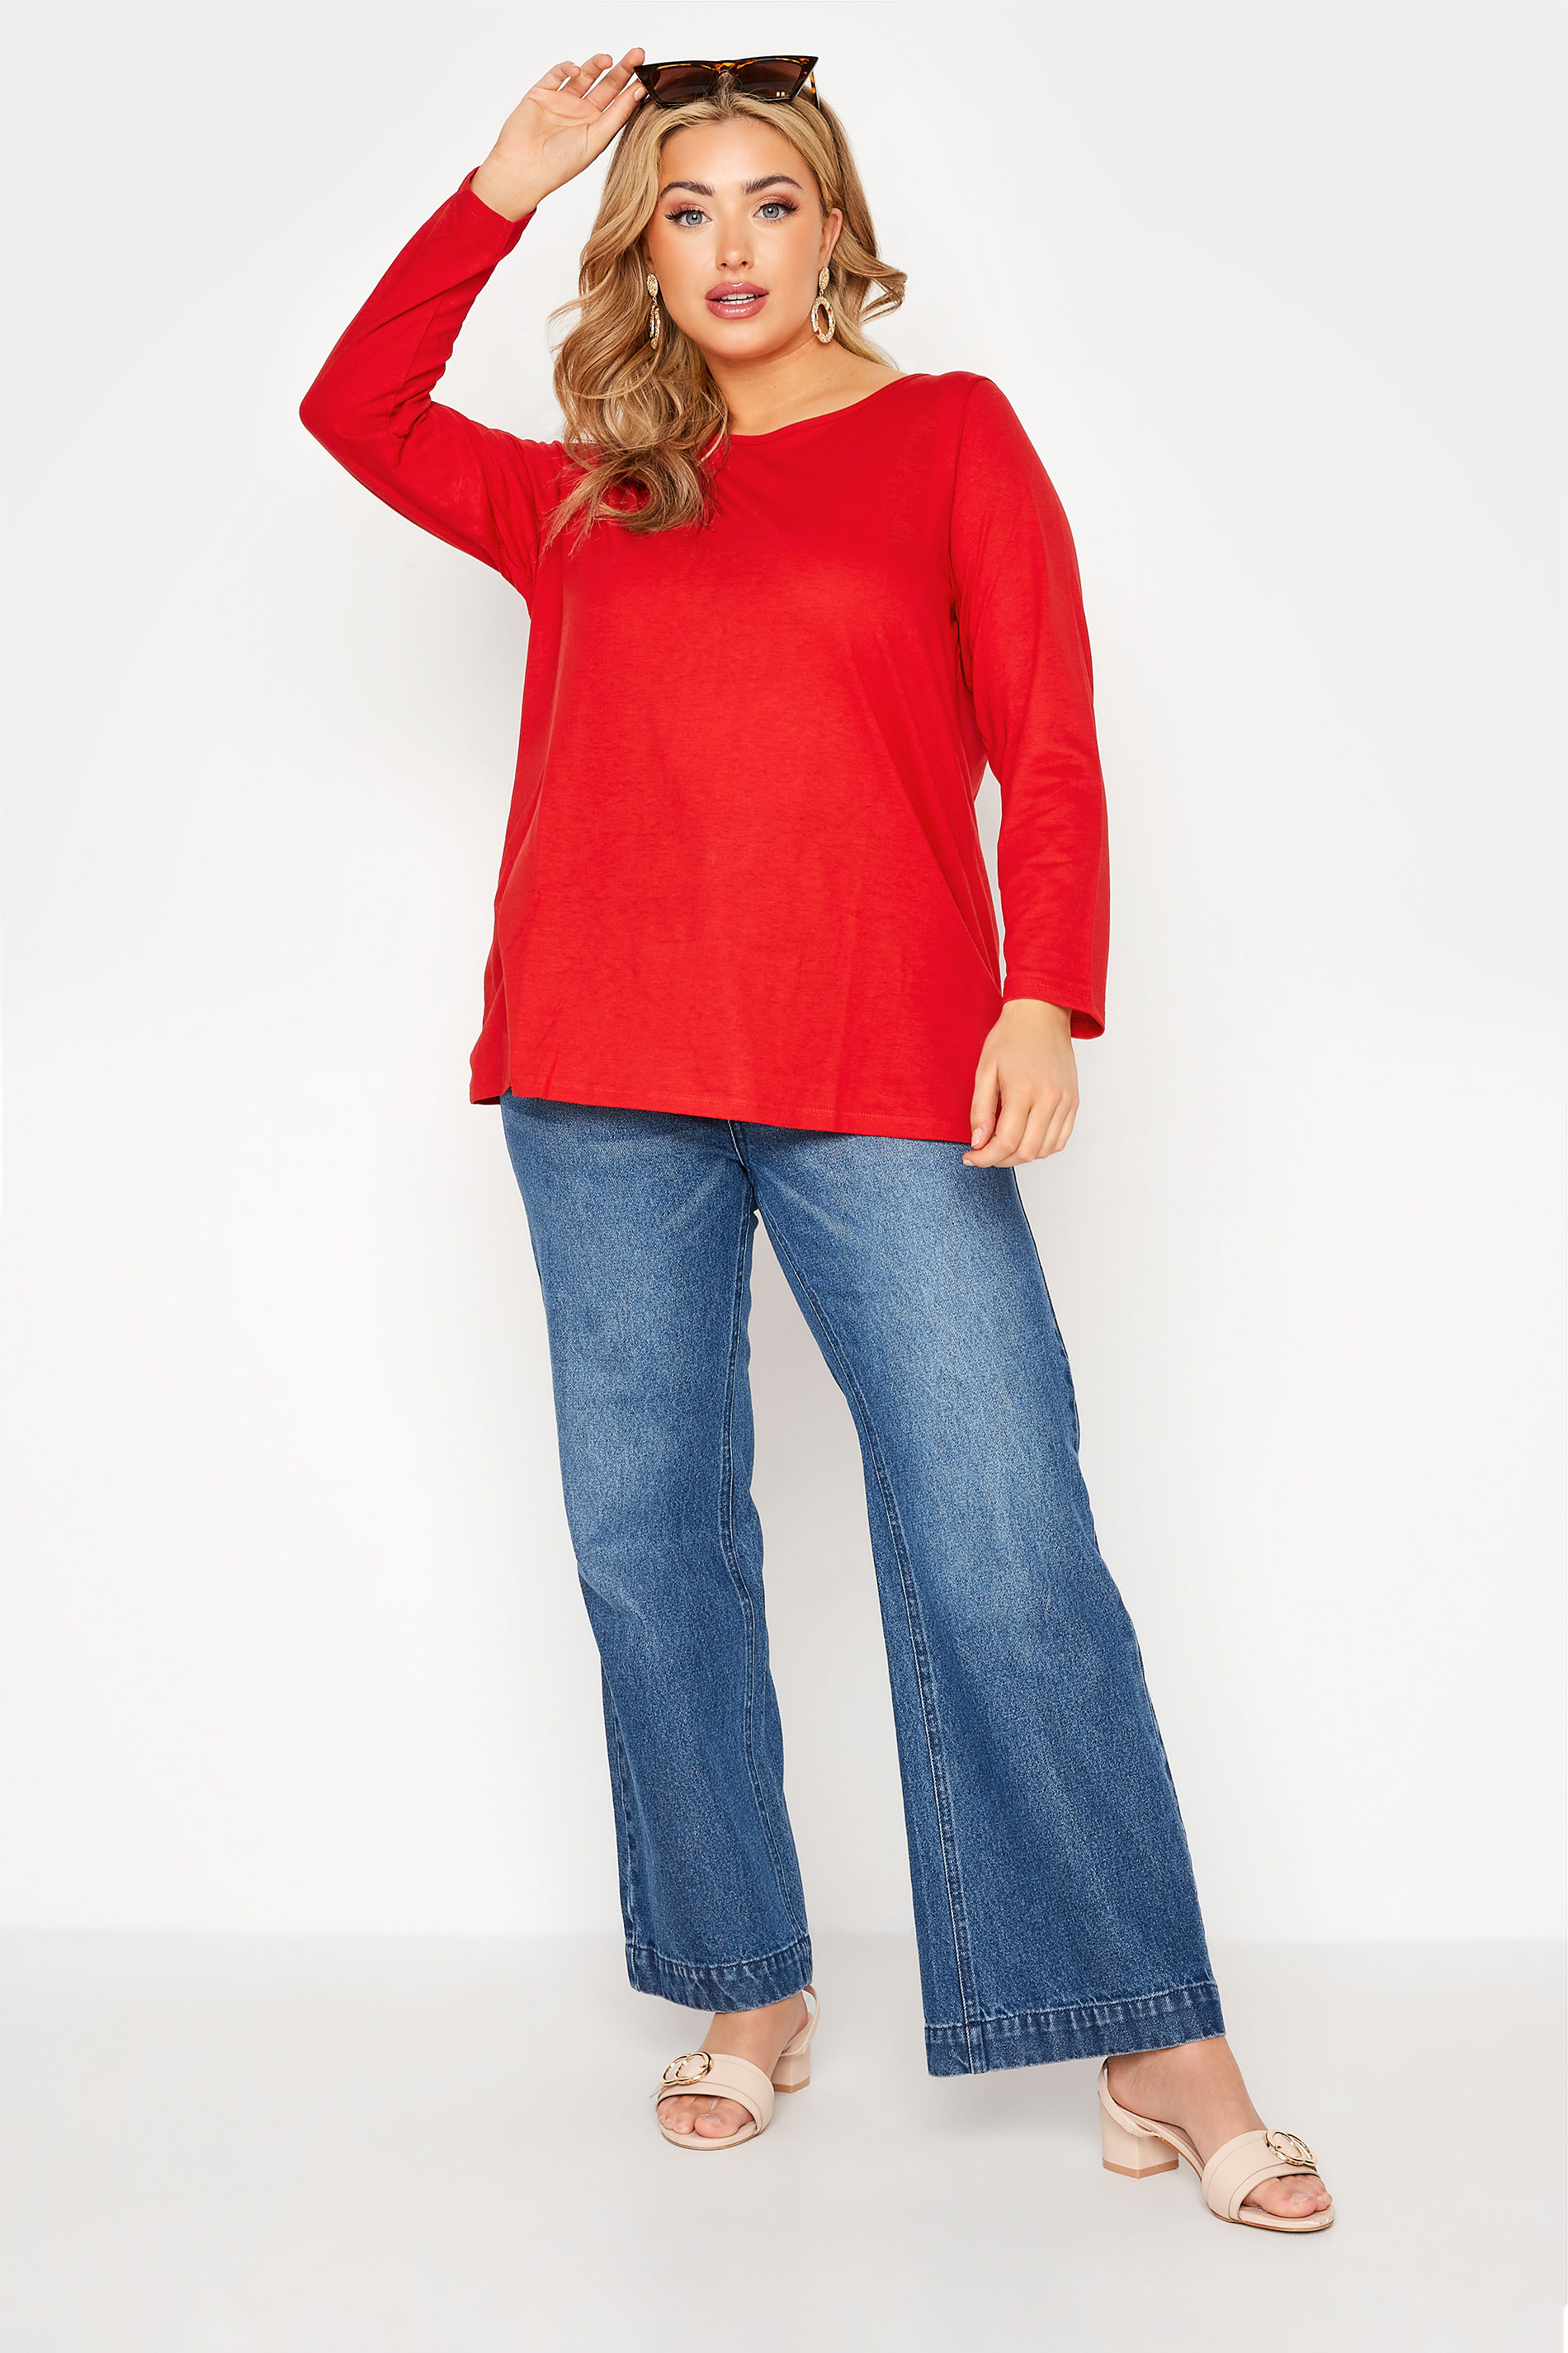 Grande taille  Tops Grande taille  T-Shirts | T-Shirt Rouge Manches Longues en Jersey - AI76561